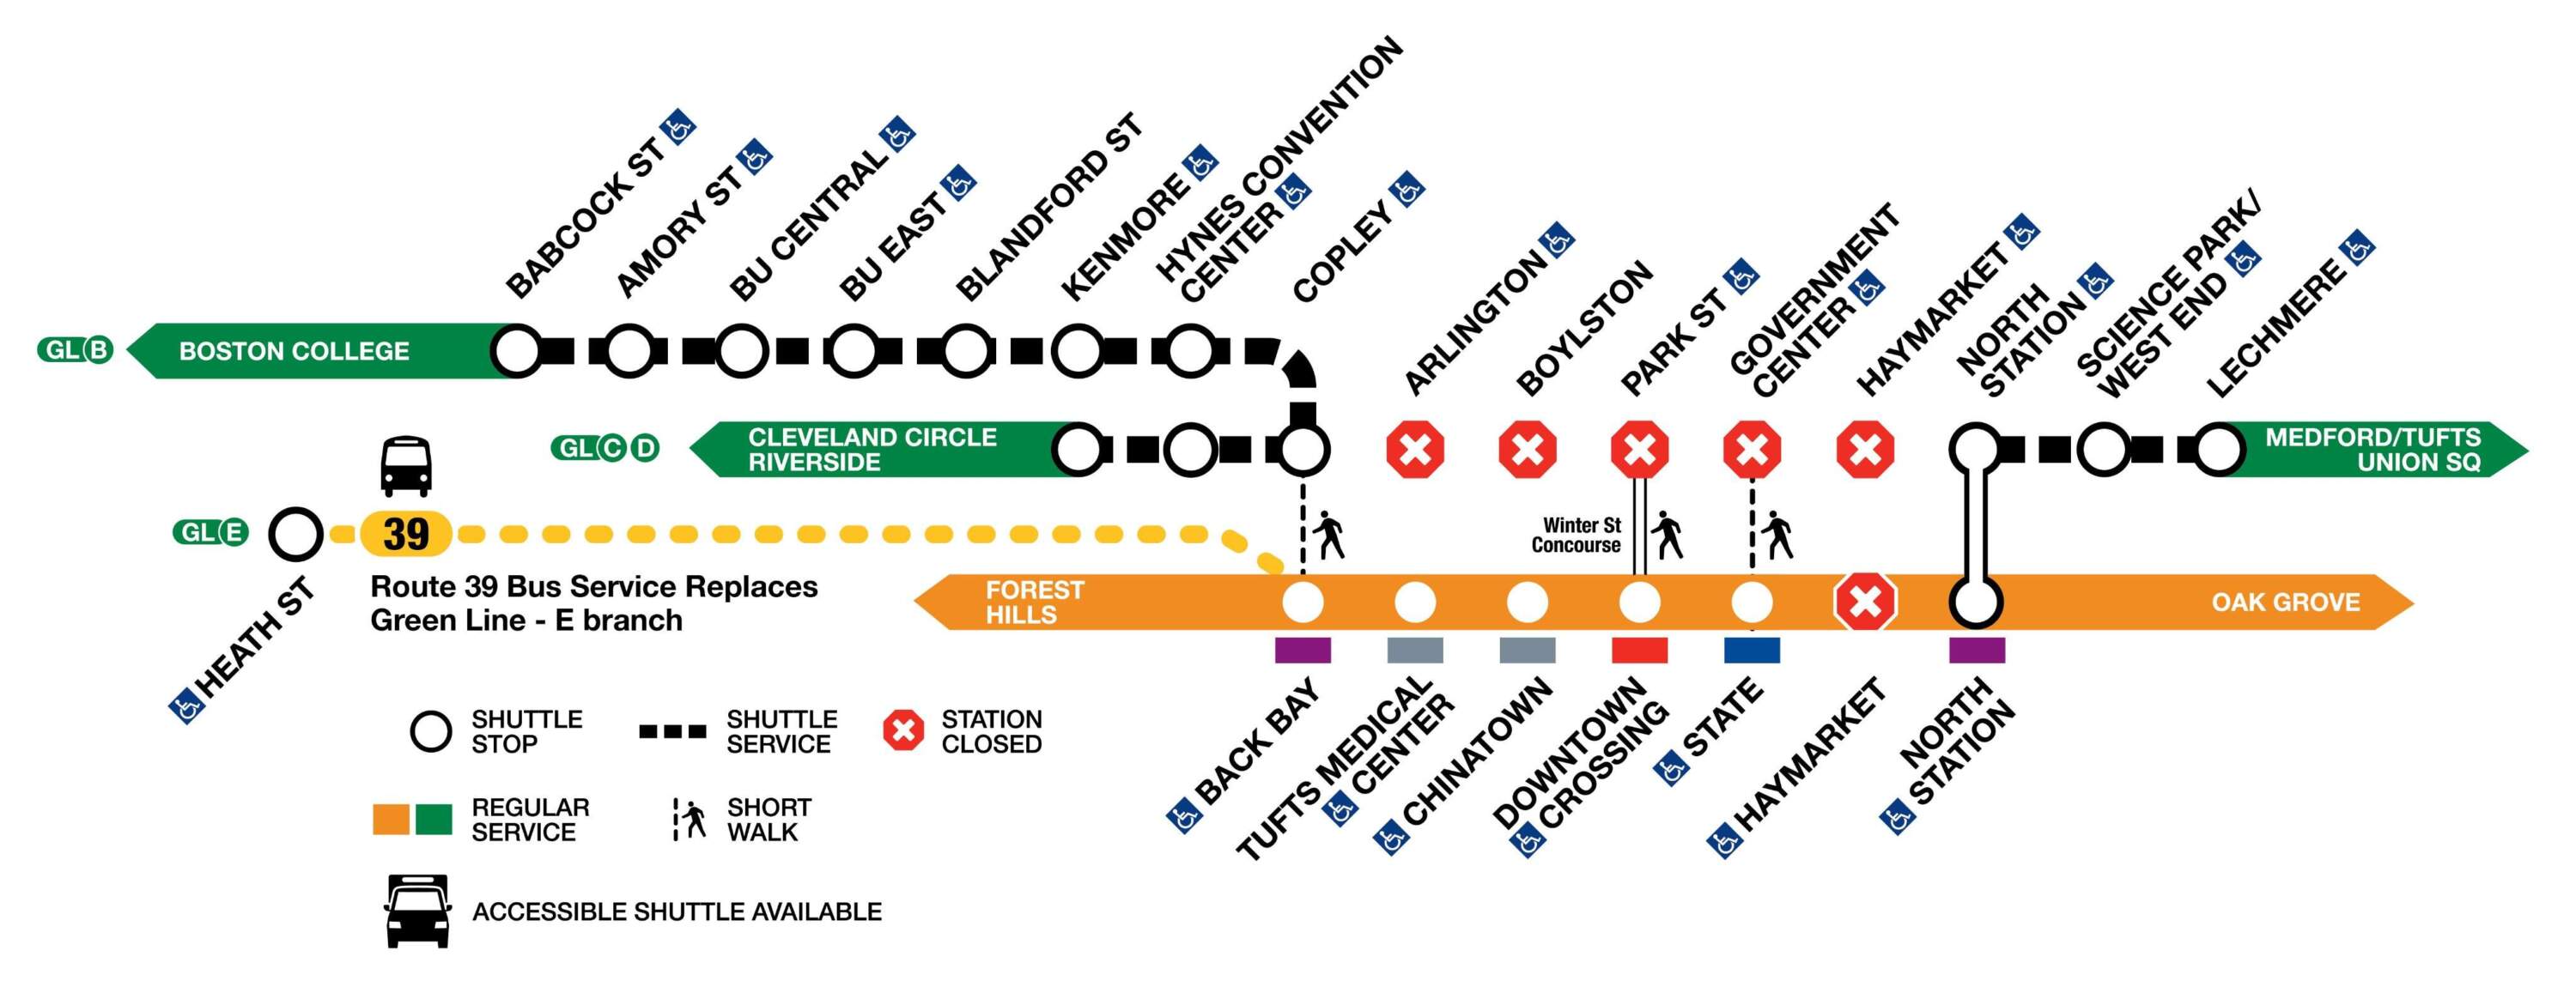 Green Line closures and alternative travel options. (Image courtesy of the MBTA)